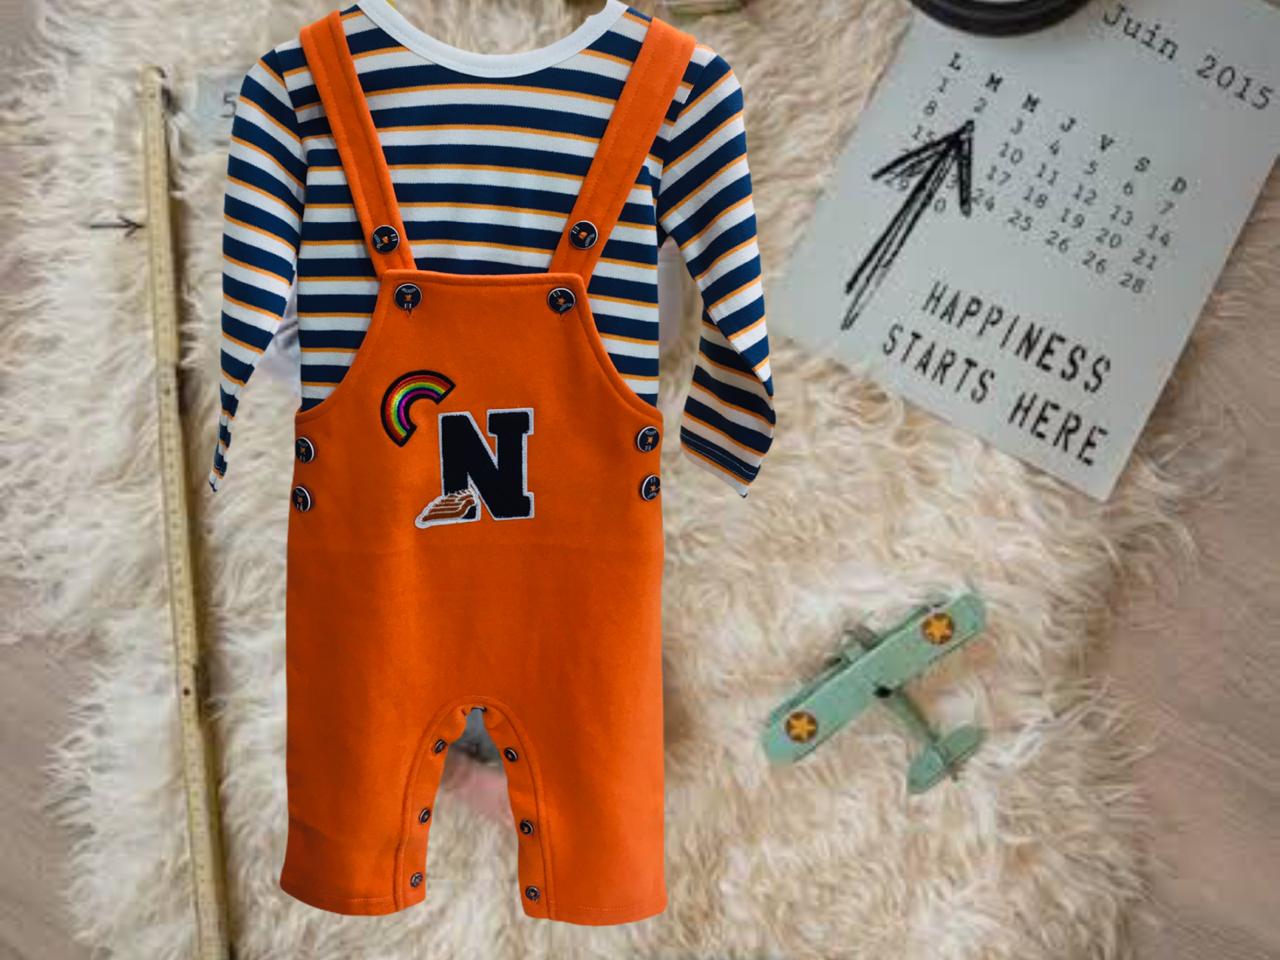 WINGS N PATCH DUNGAREE